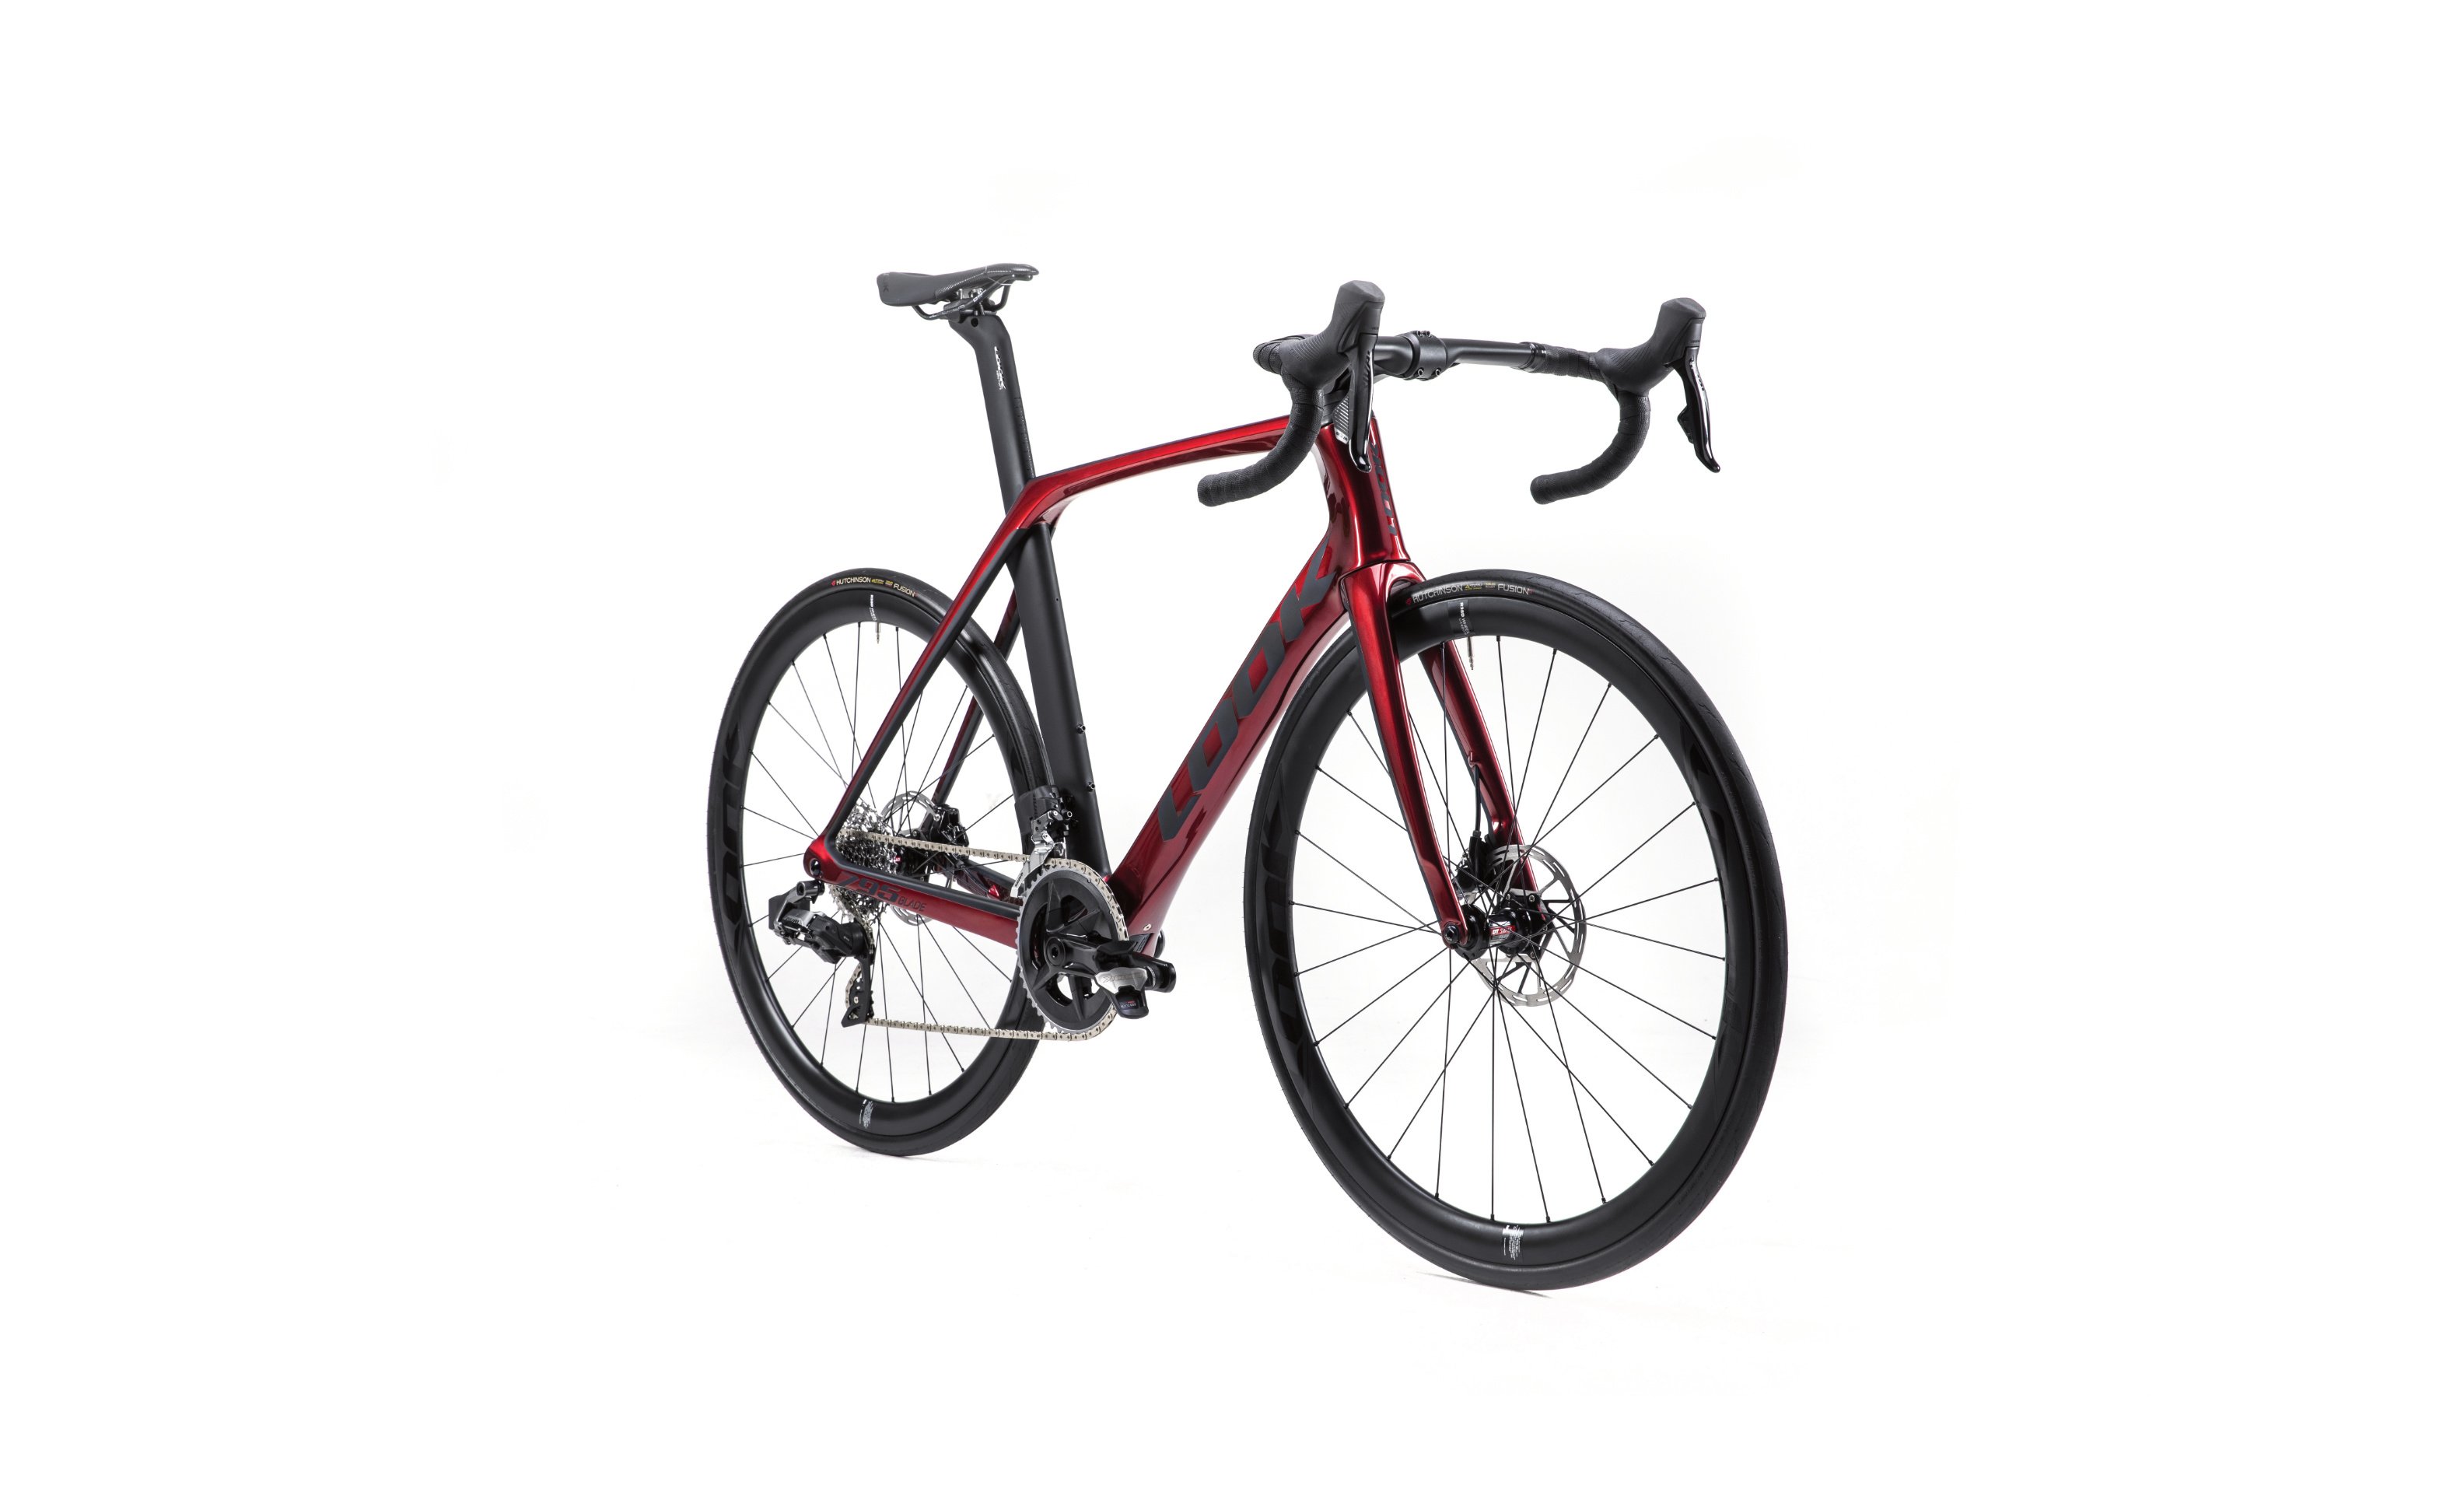 795-blade-rs-sram-rival-axs-inteference-a2